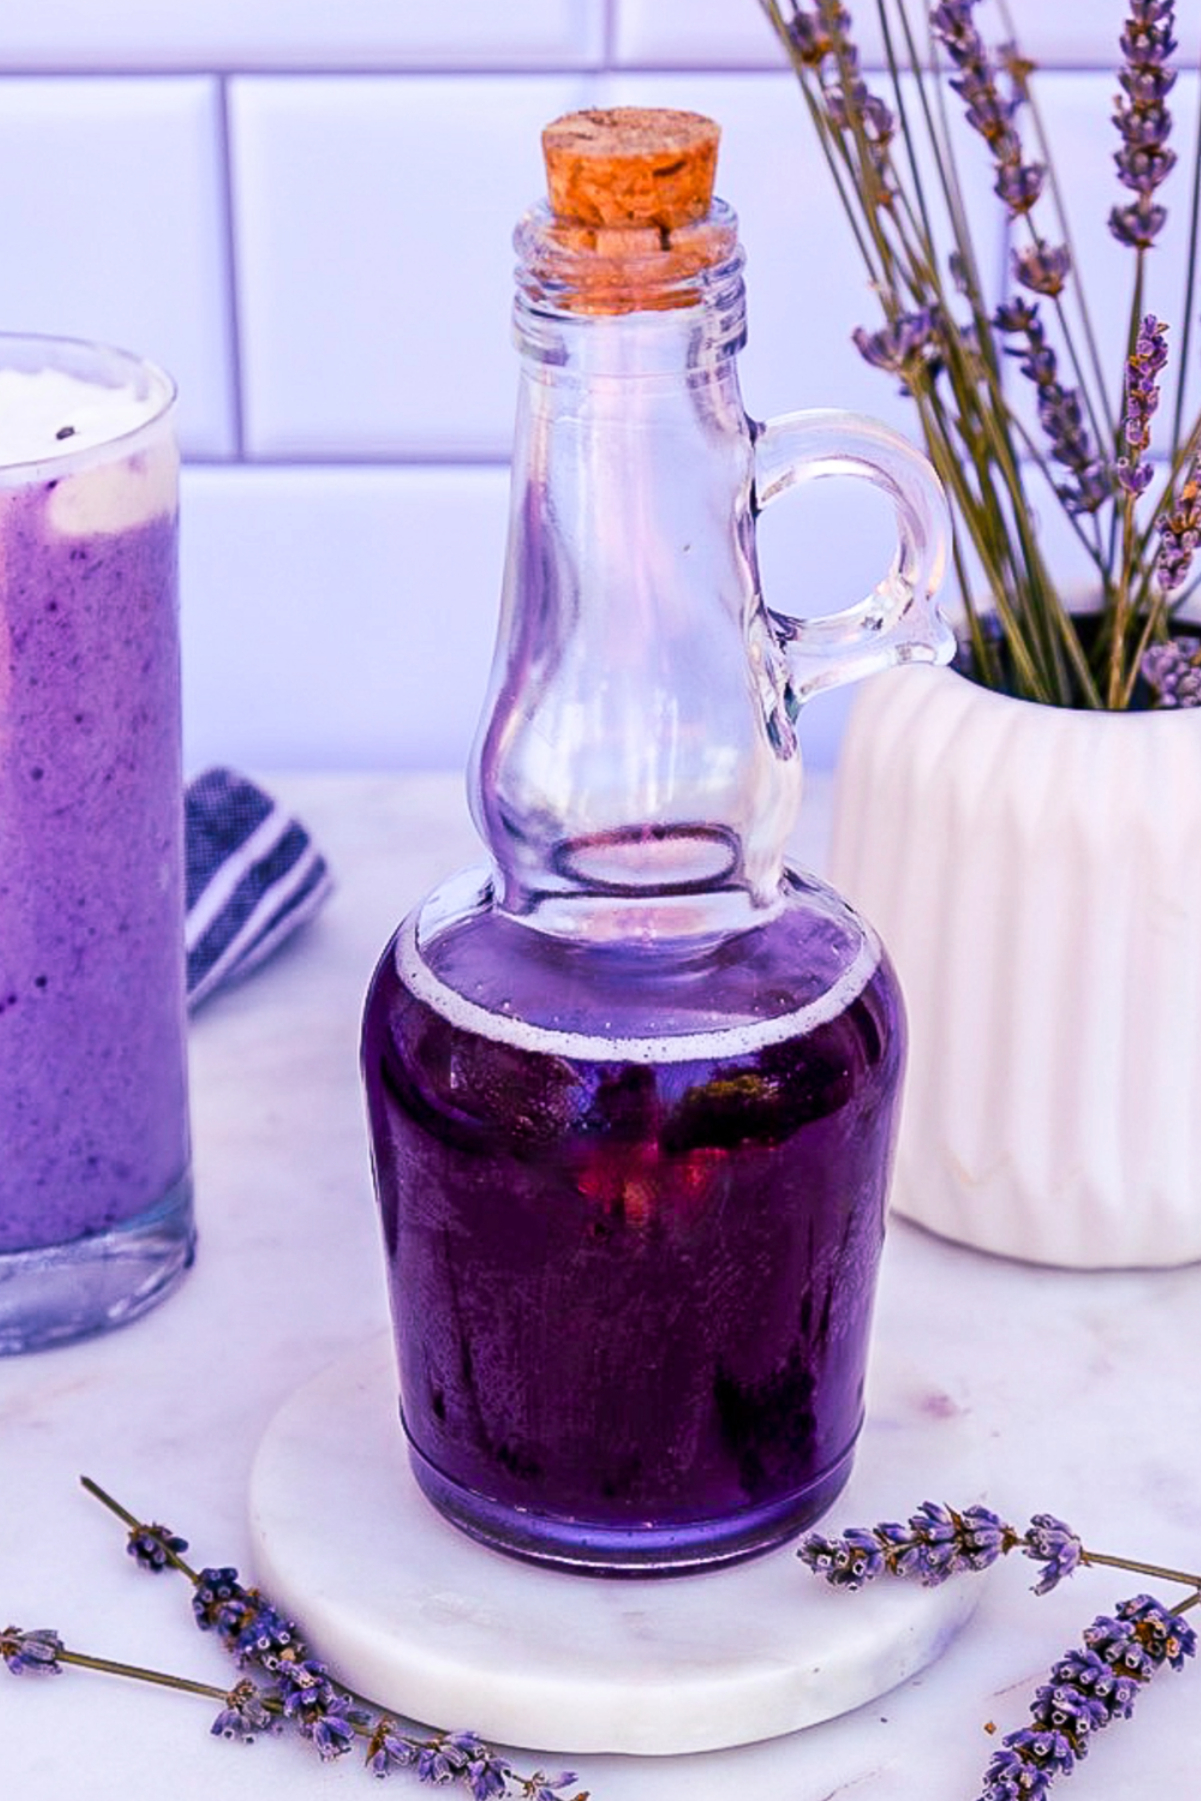 Homemade lavender syrup in a small clear pouring jug.